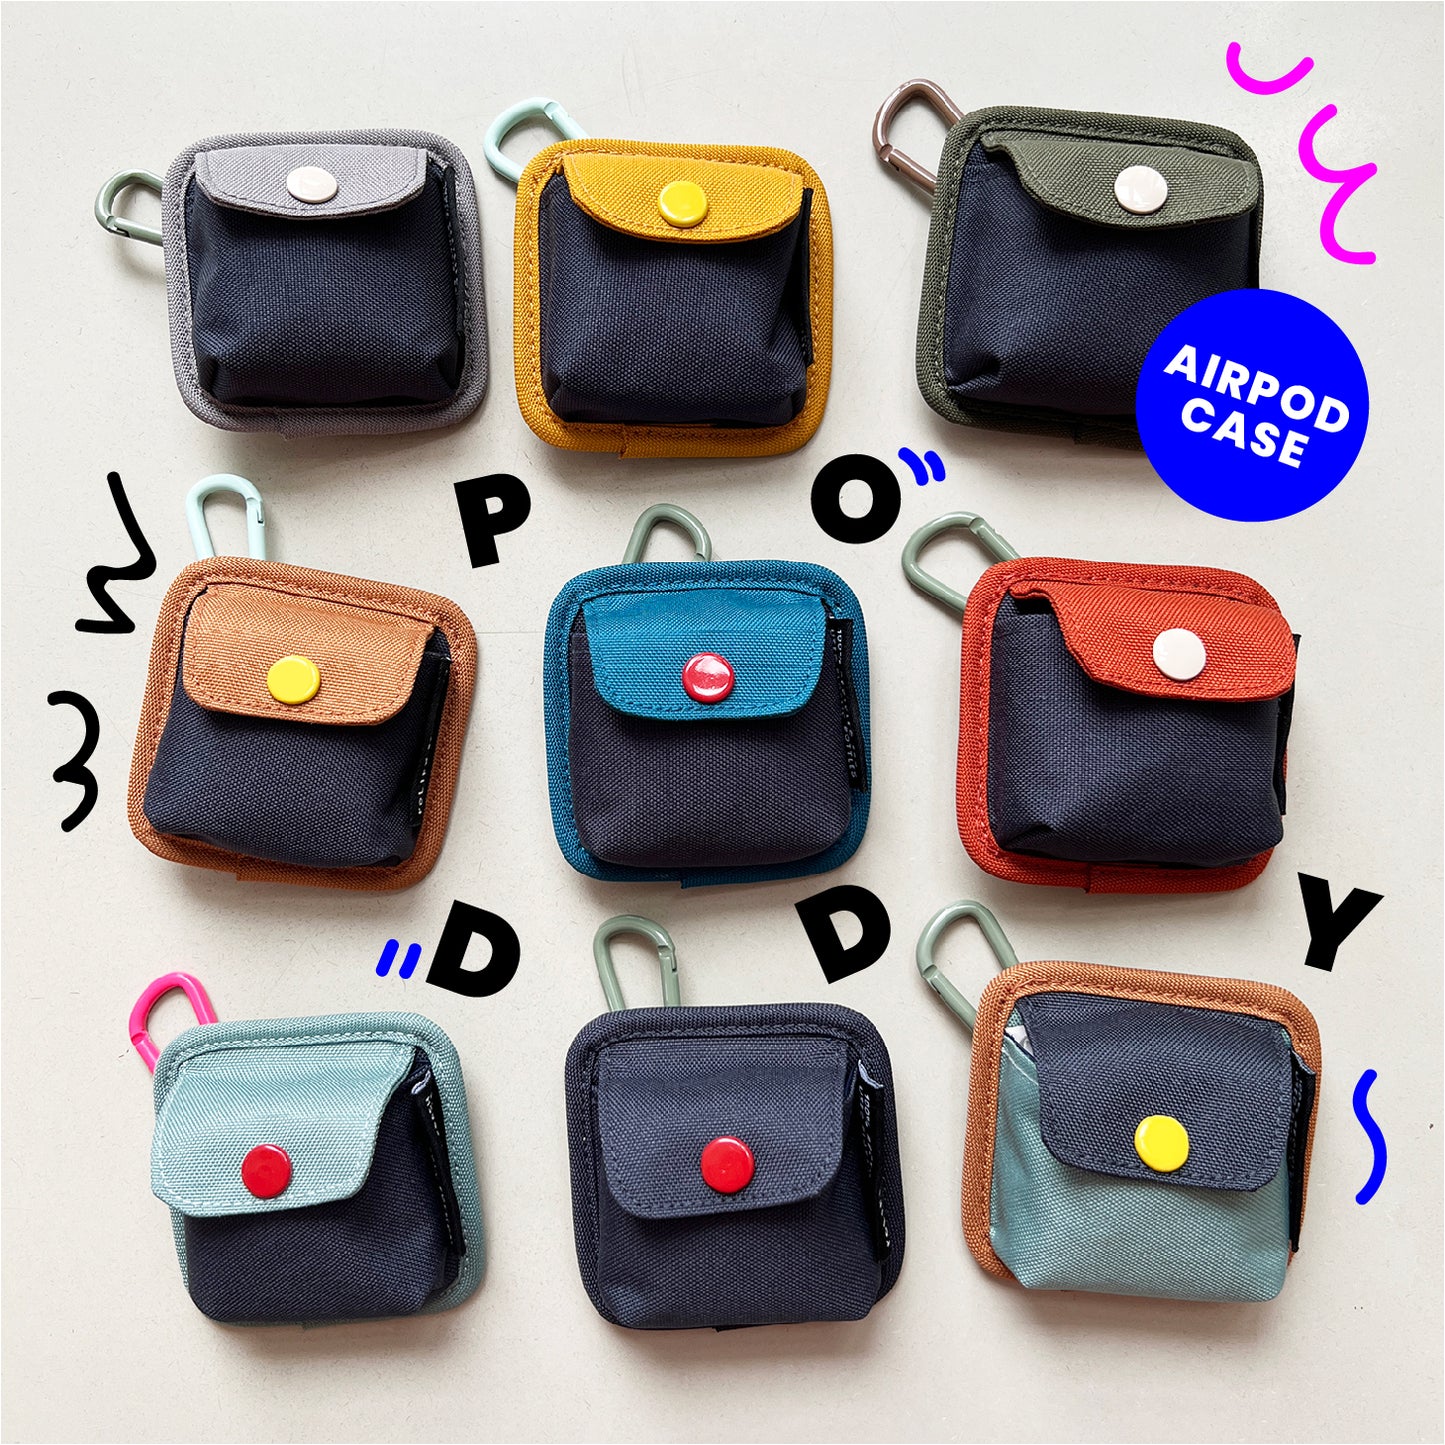 Poddy relife ocean airpod pouch